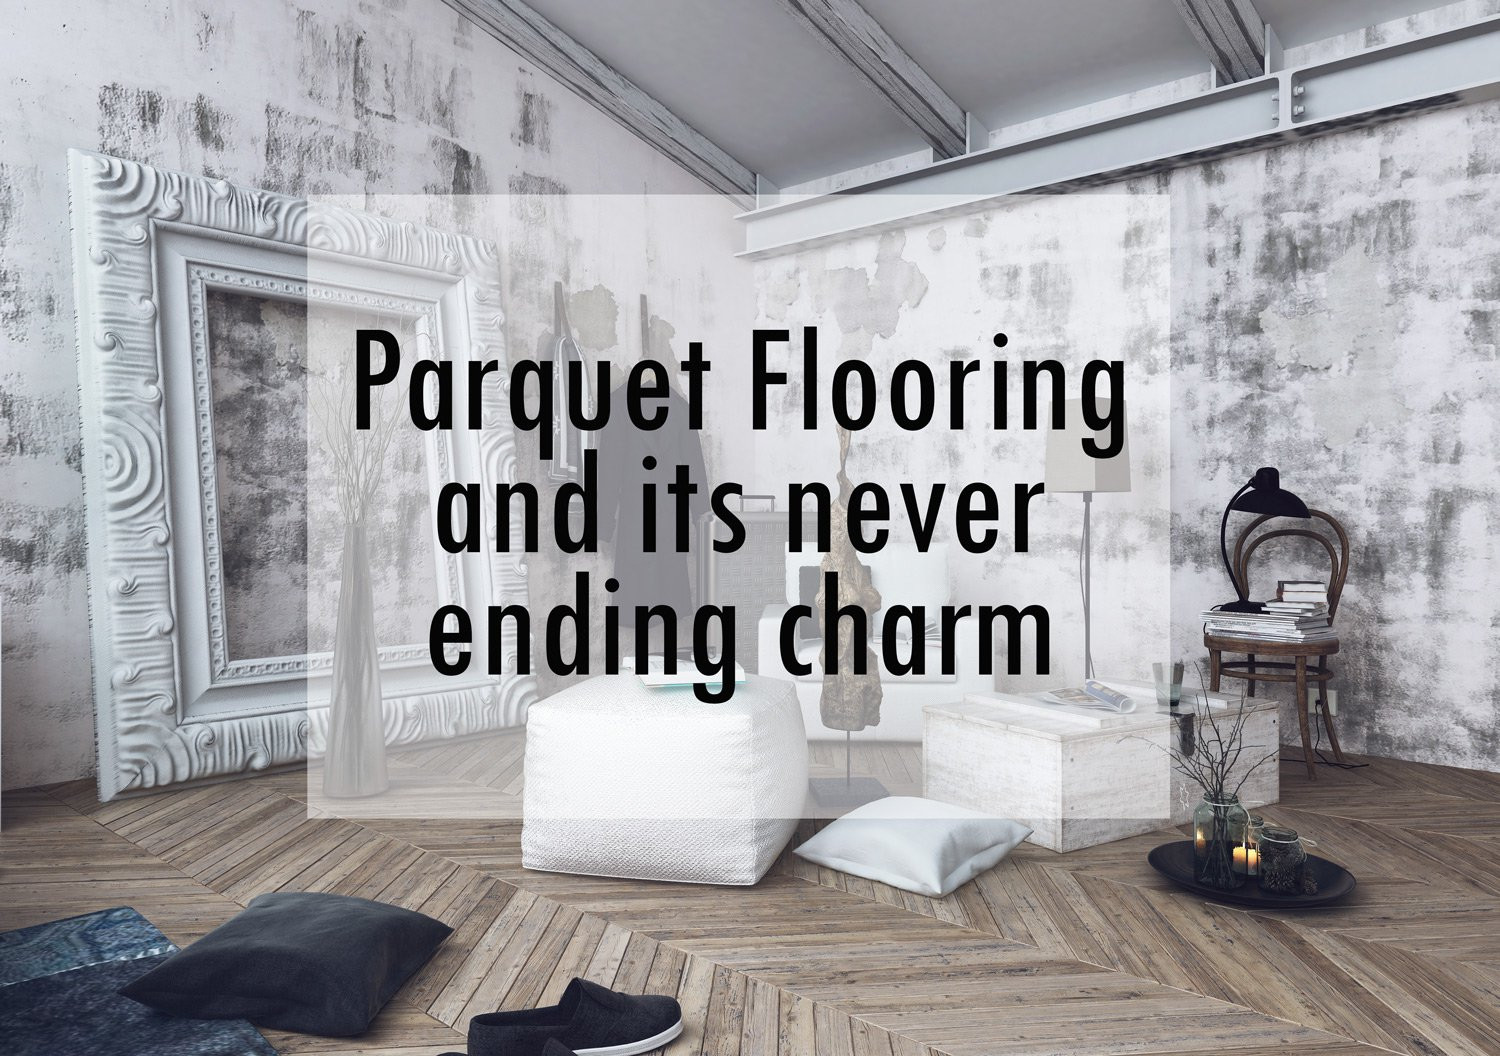 hardwood flooring installation issues of about parquet flooring types and installation dengarden intended for 13317391